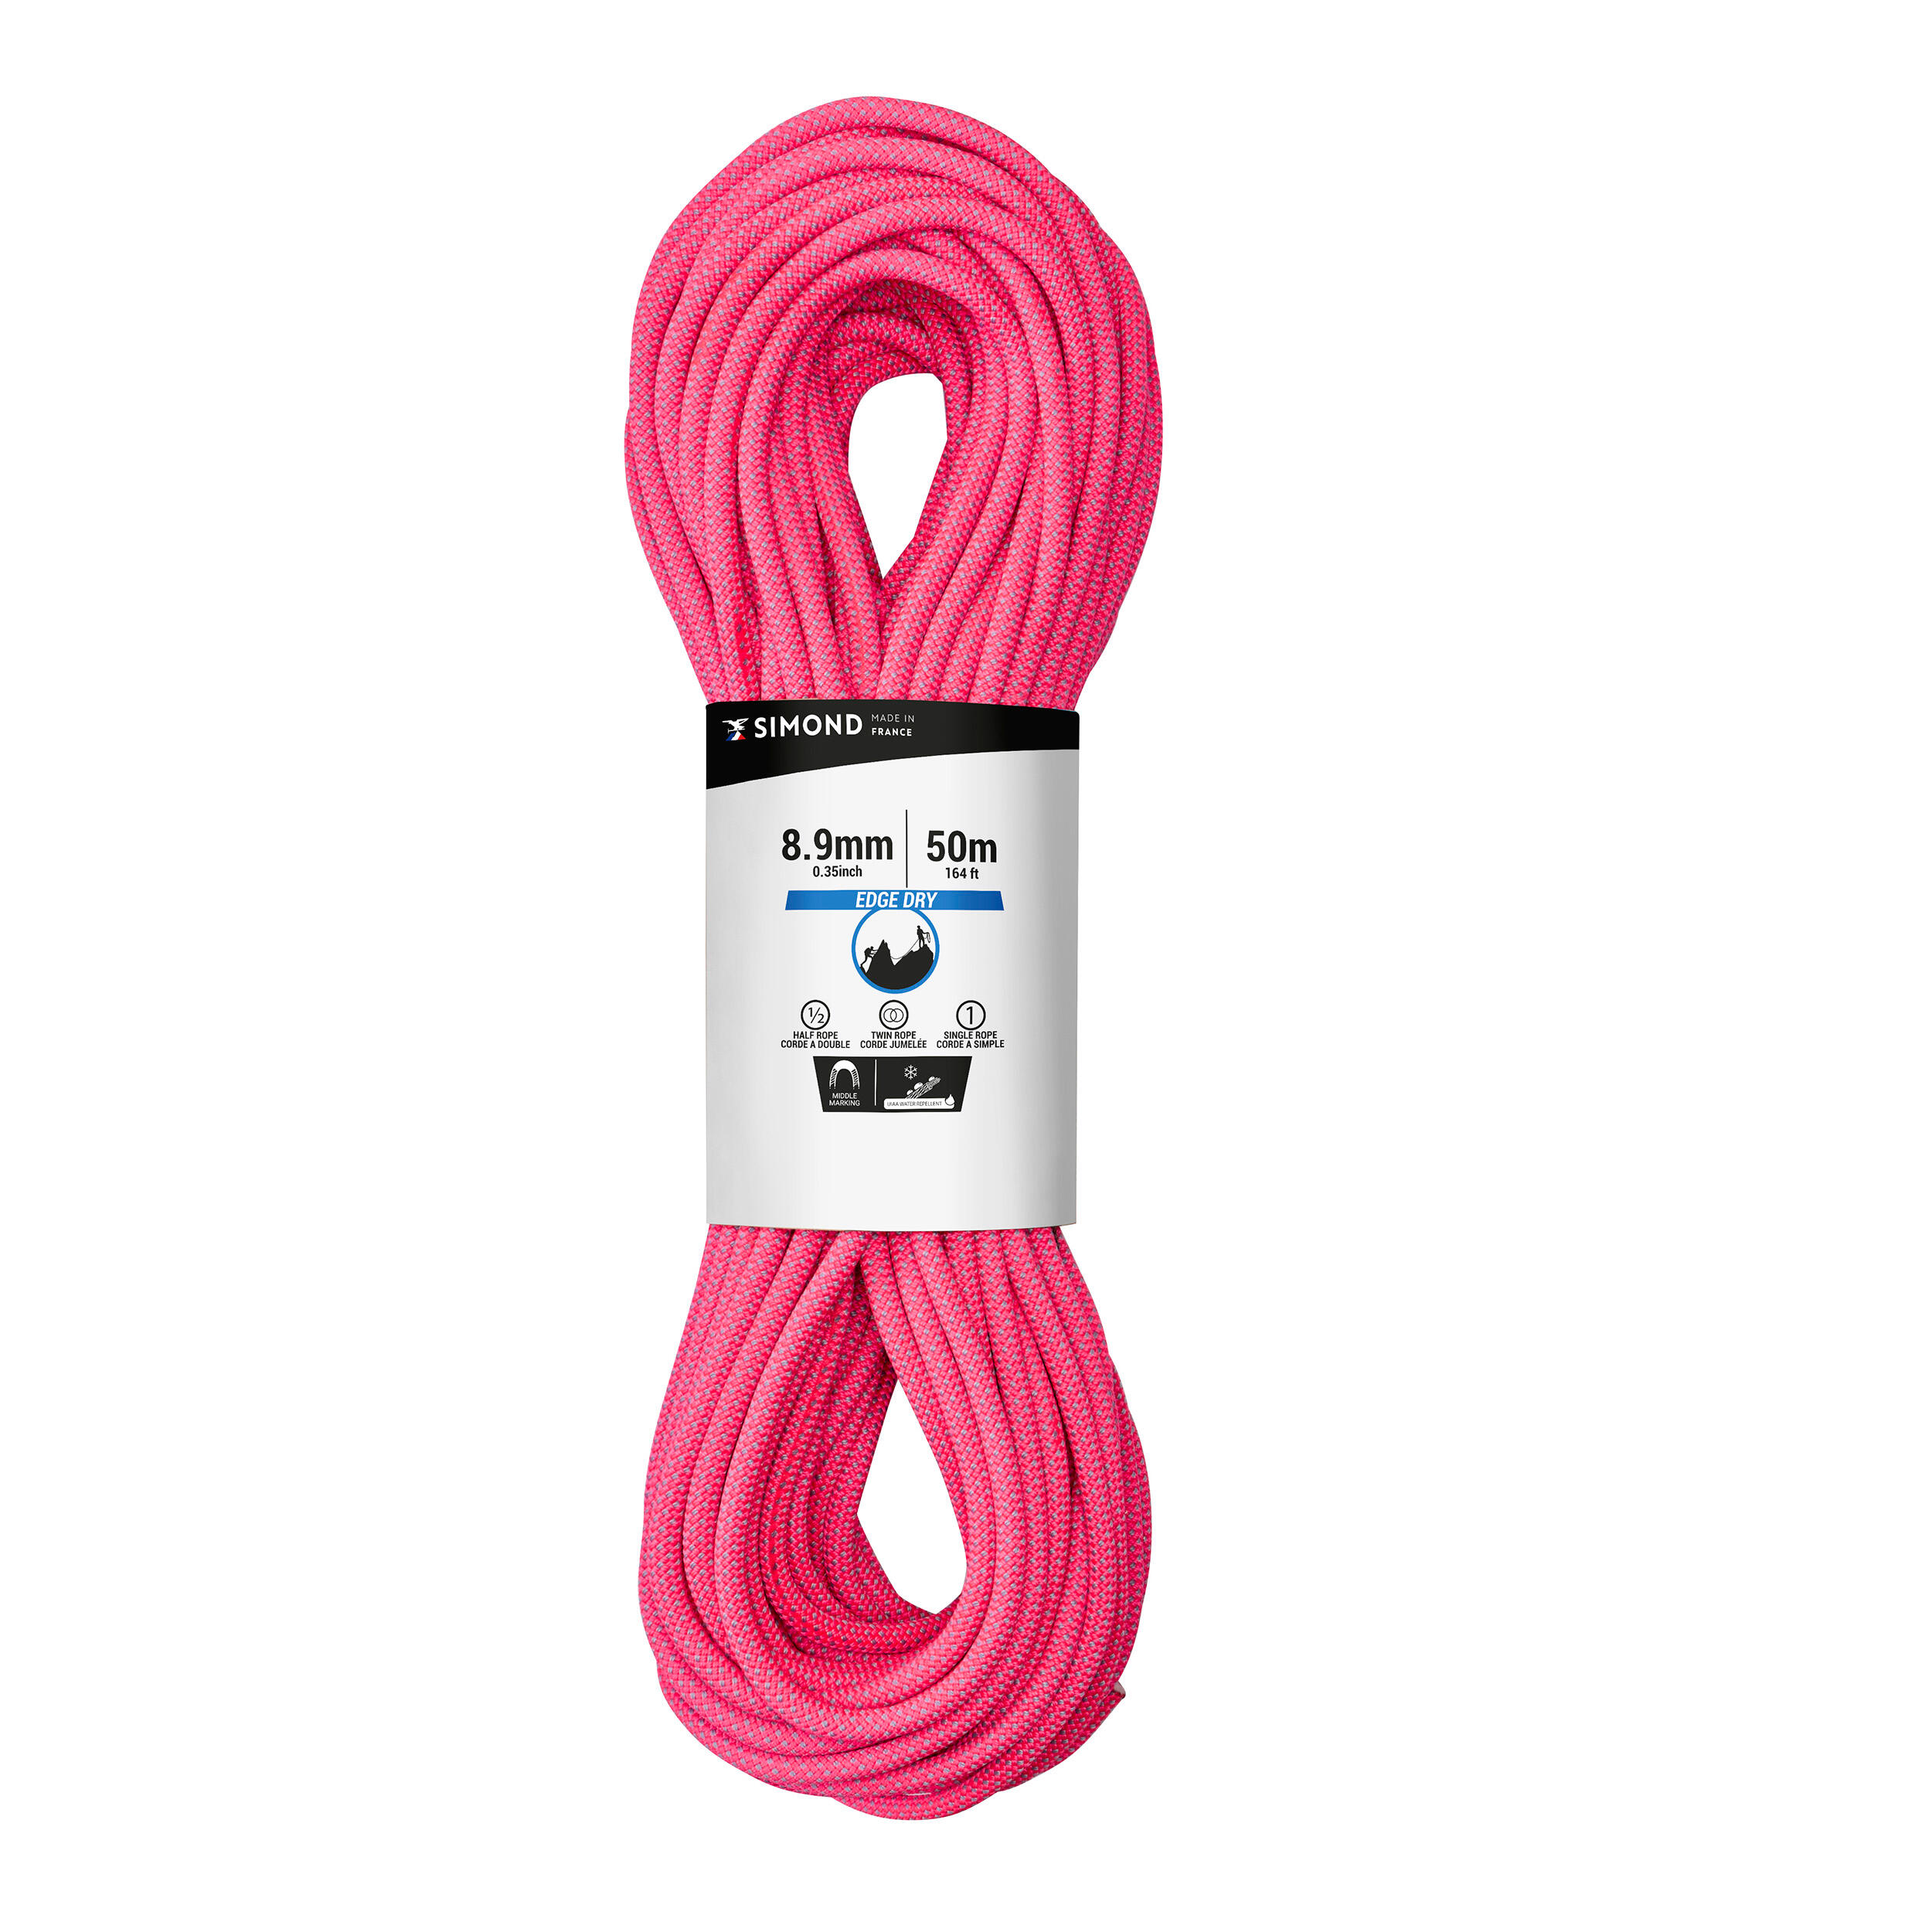 SIMOND TRIPLE DRY ROPE STANDARD FOR CLIMBING AND MOUNTAINEERING 8.9mmx50m-EDGE DRY ROSE